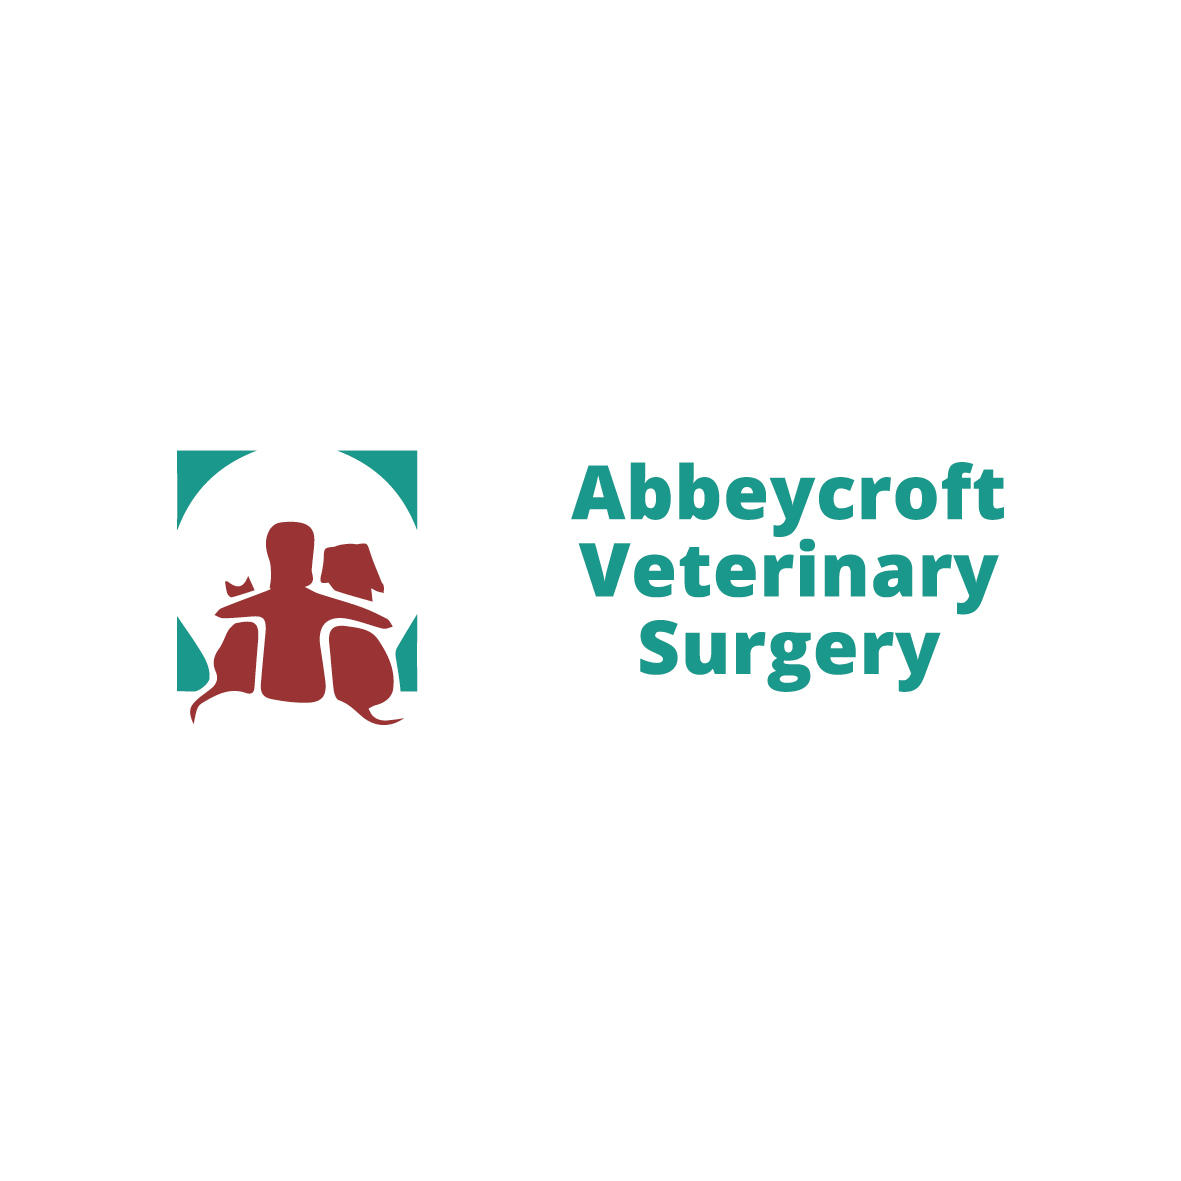 Willows Veterinary Group - Abbeycroft Veterinary Surgery Northwich 01606 40332